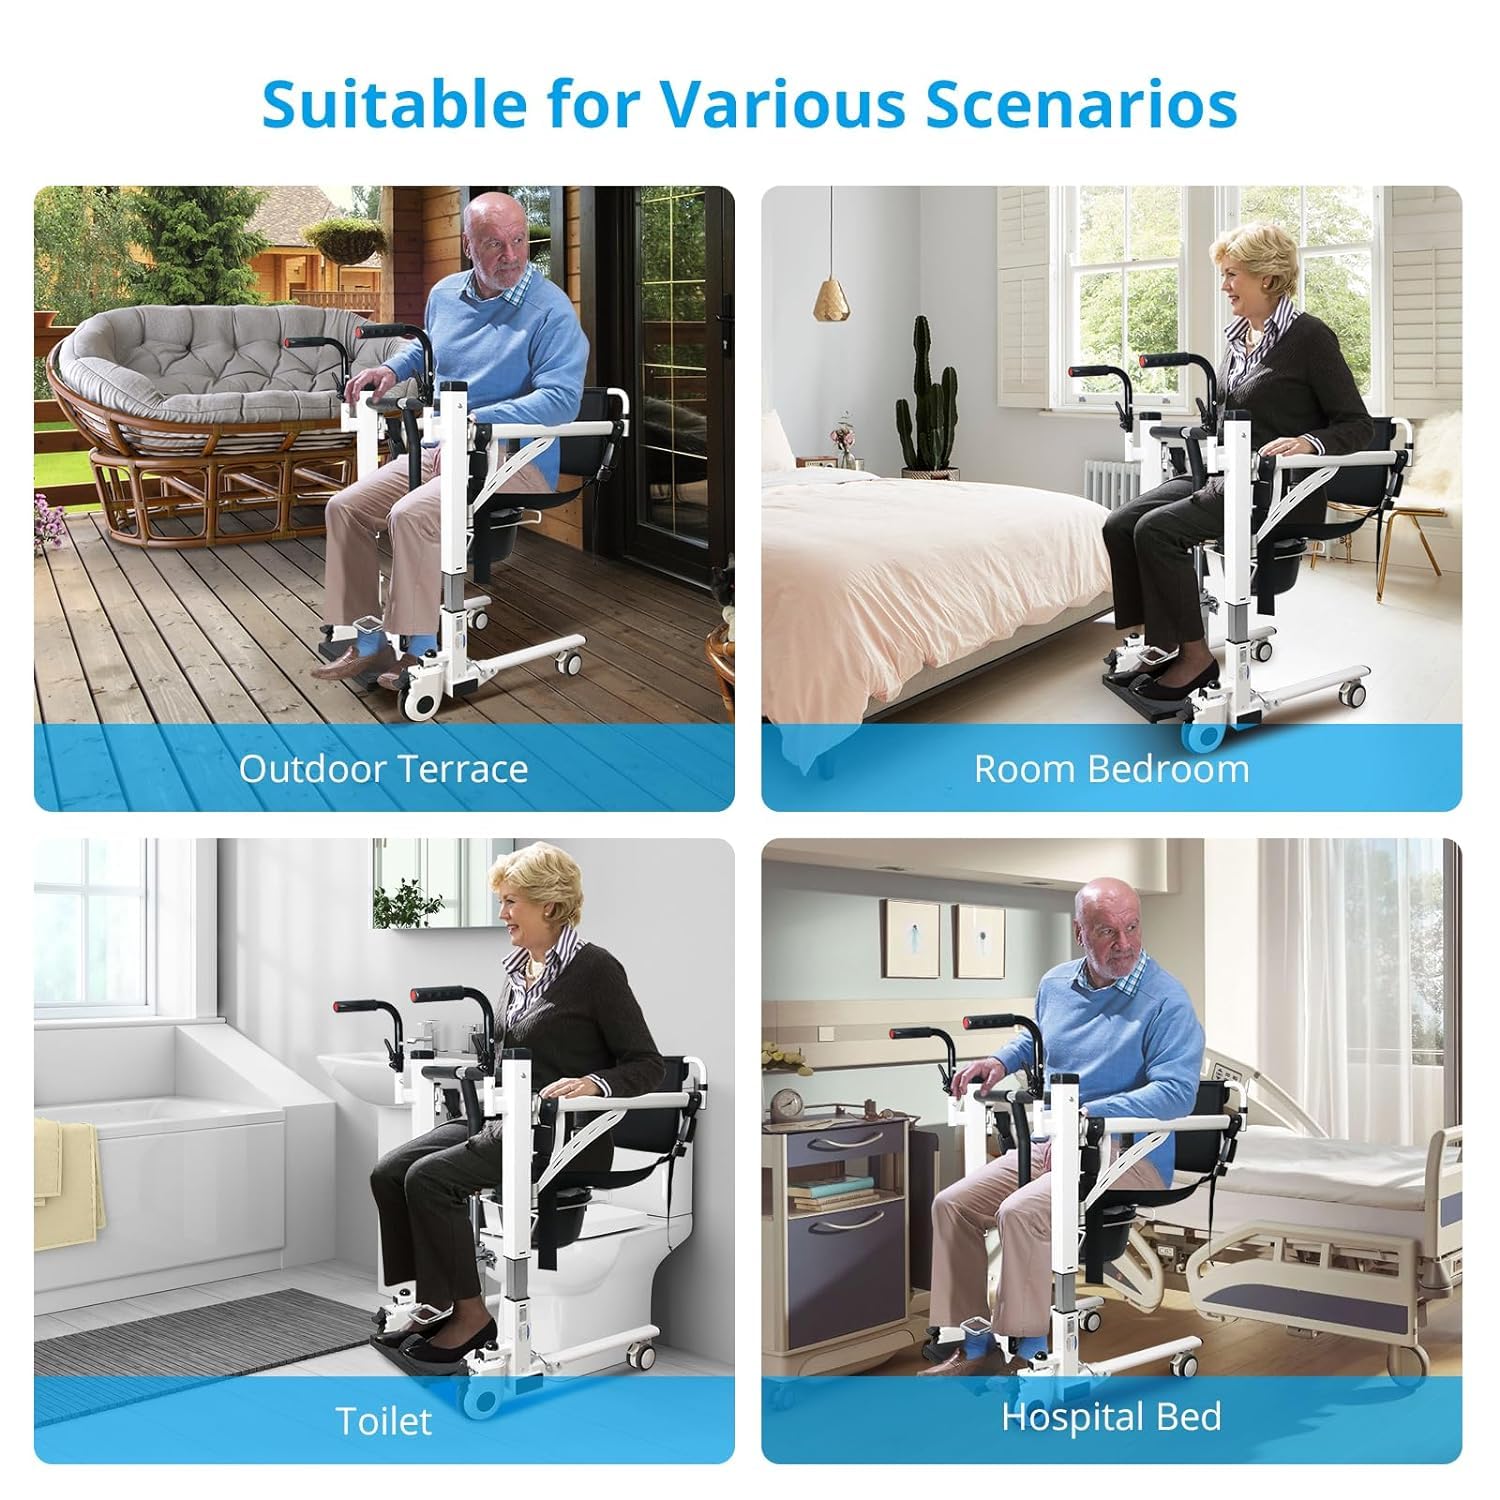 Patient Lift Transfer Chair,KIMORE Hoyer Lifts for Home Use,Hydraulic Patient Lift Transfer Chair, Bathroom Wheelchair with 180° Split Seat and Potty, Portable Elderly Lift aid Bedside Commode Chair